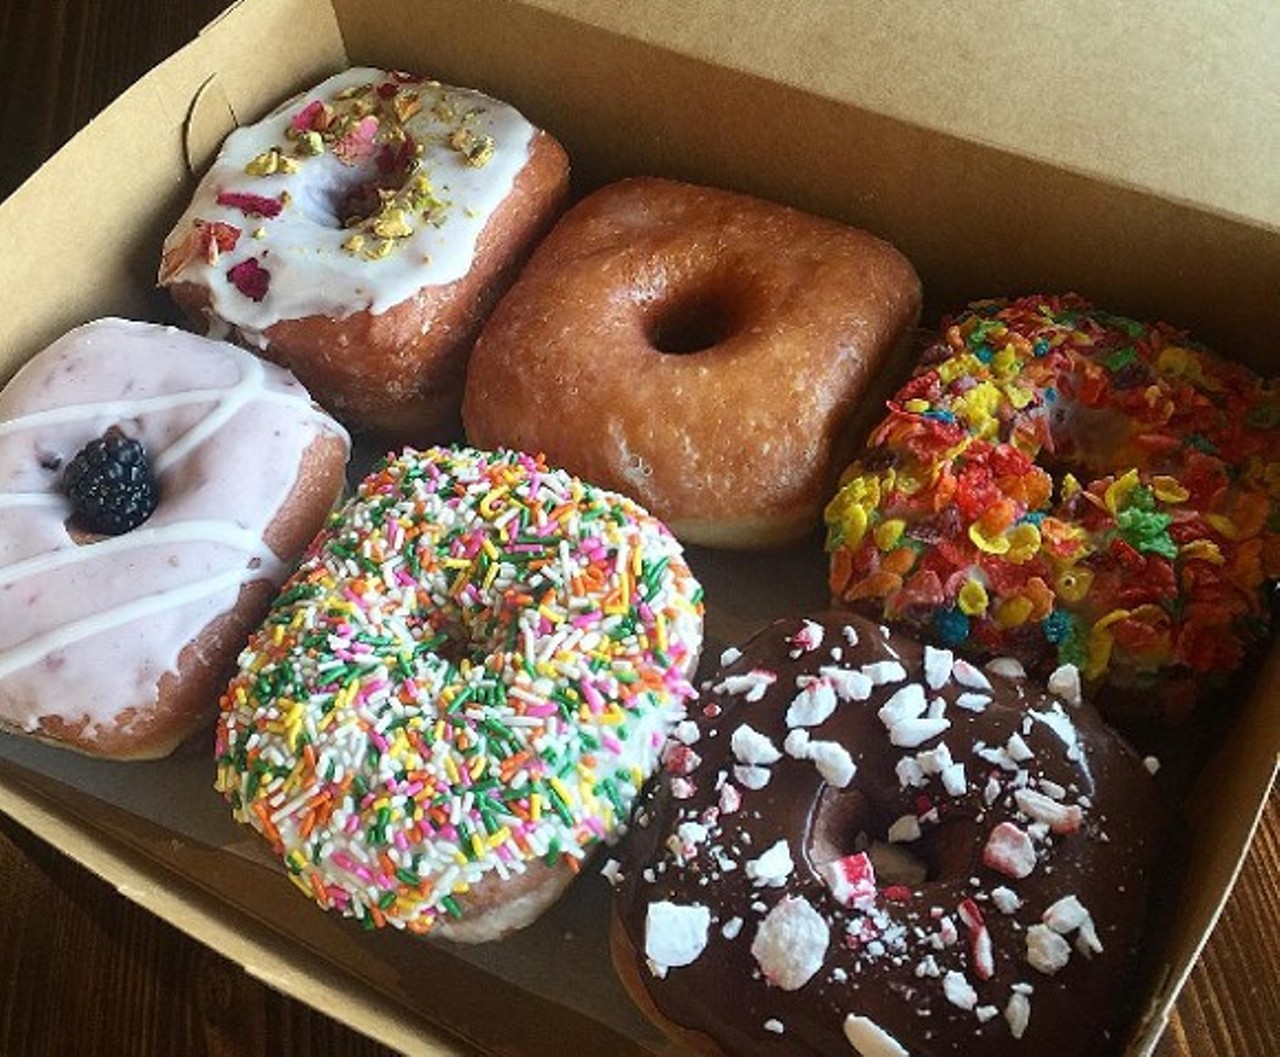 Valkyrie Doughnuts
12226 Corporate Blvd.
Their classic vegan square-cut, yeast-raised doughnuts are accompanied by vegan milkshakes, soft-serve, and Oreo bombs if you're lucky. 
Photo via Valkyrie Doughnuts/Instagram